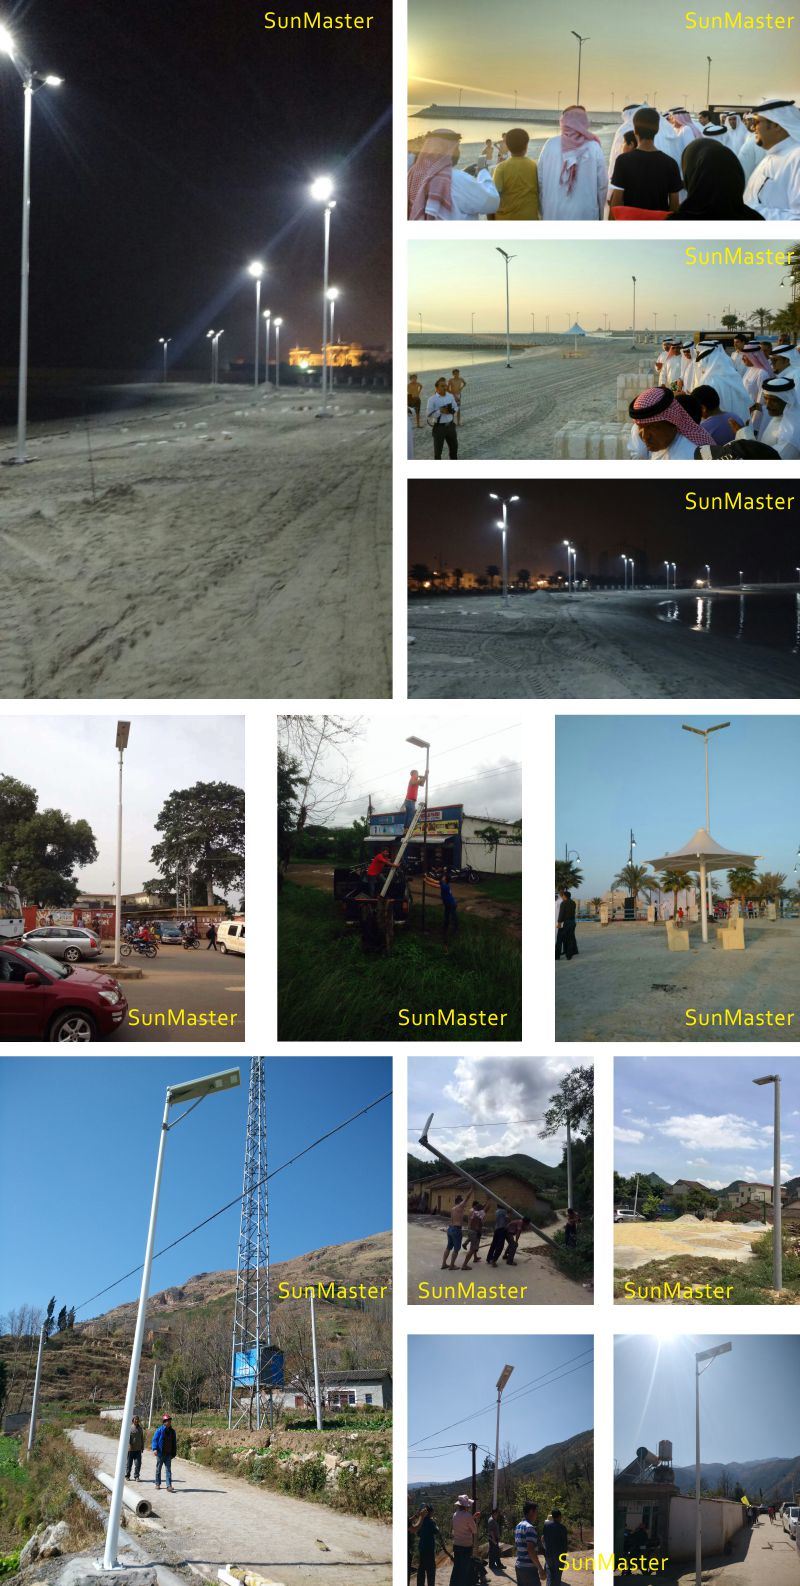 Free Sample All in One Integrated Solar LED Street Light